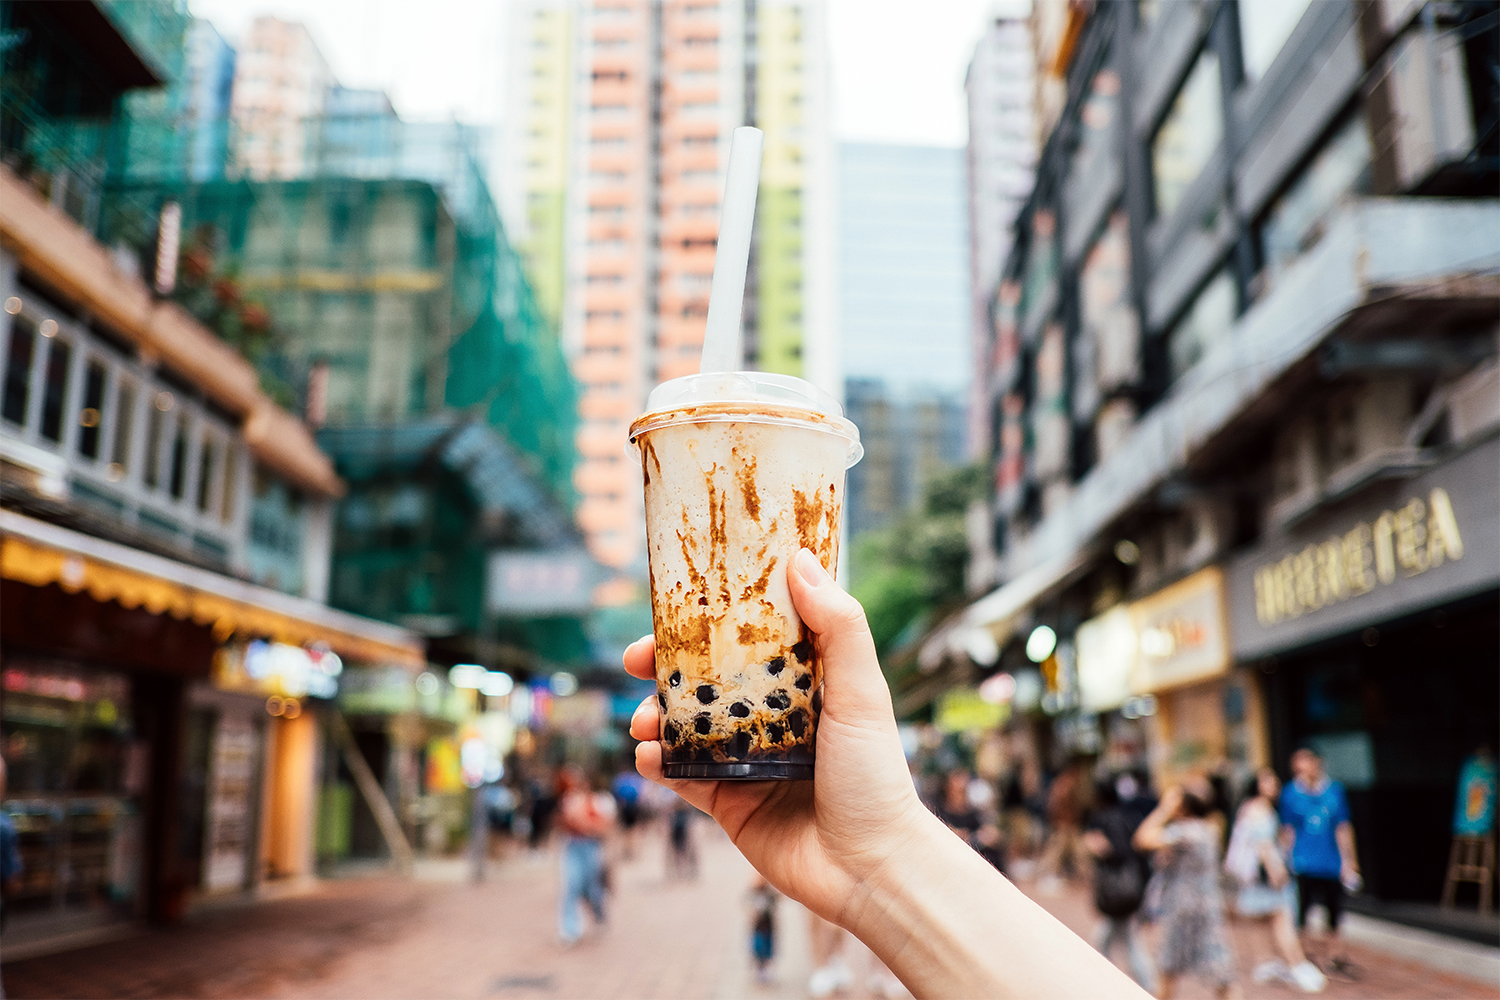 Boba Tea Flavors: Over 30 Popular Bubble Teas to Try